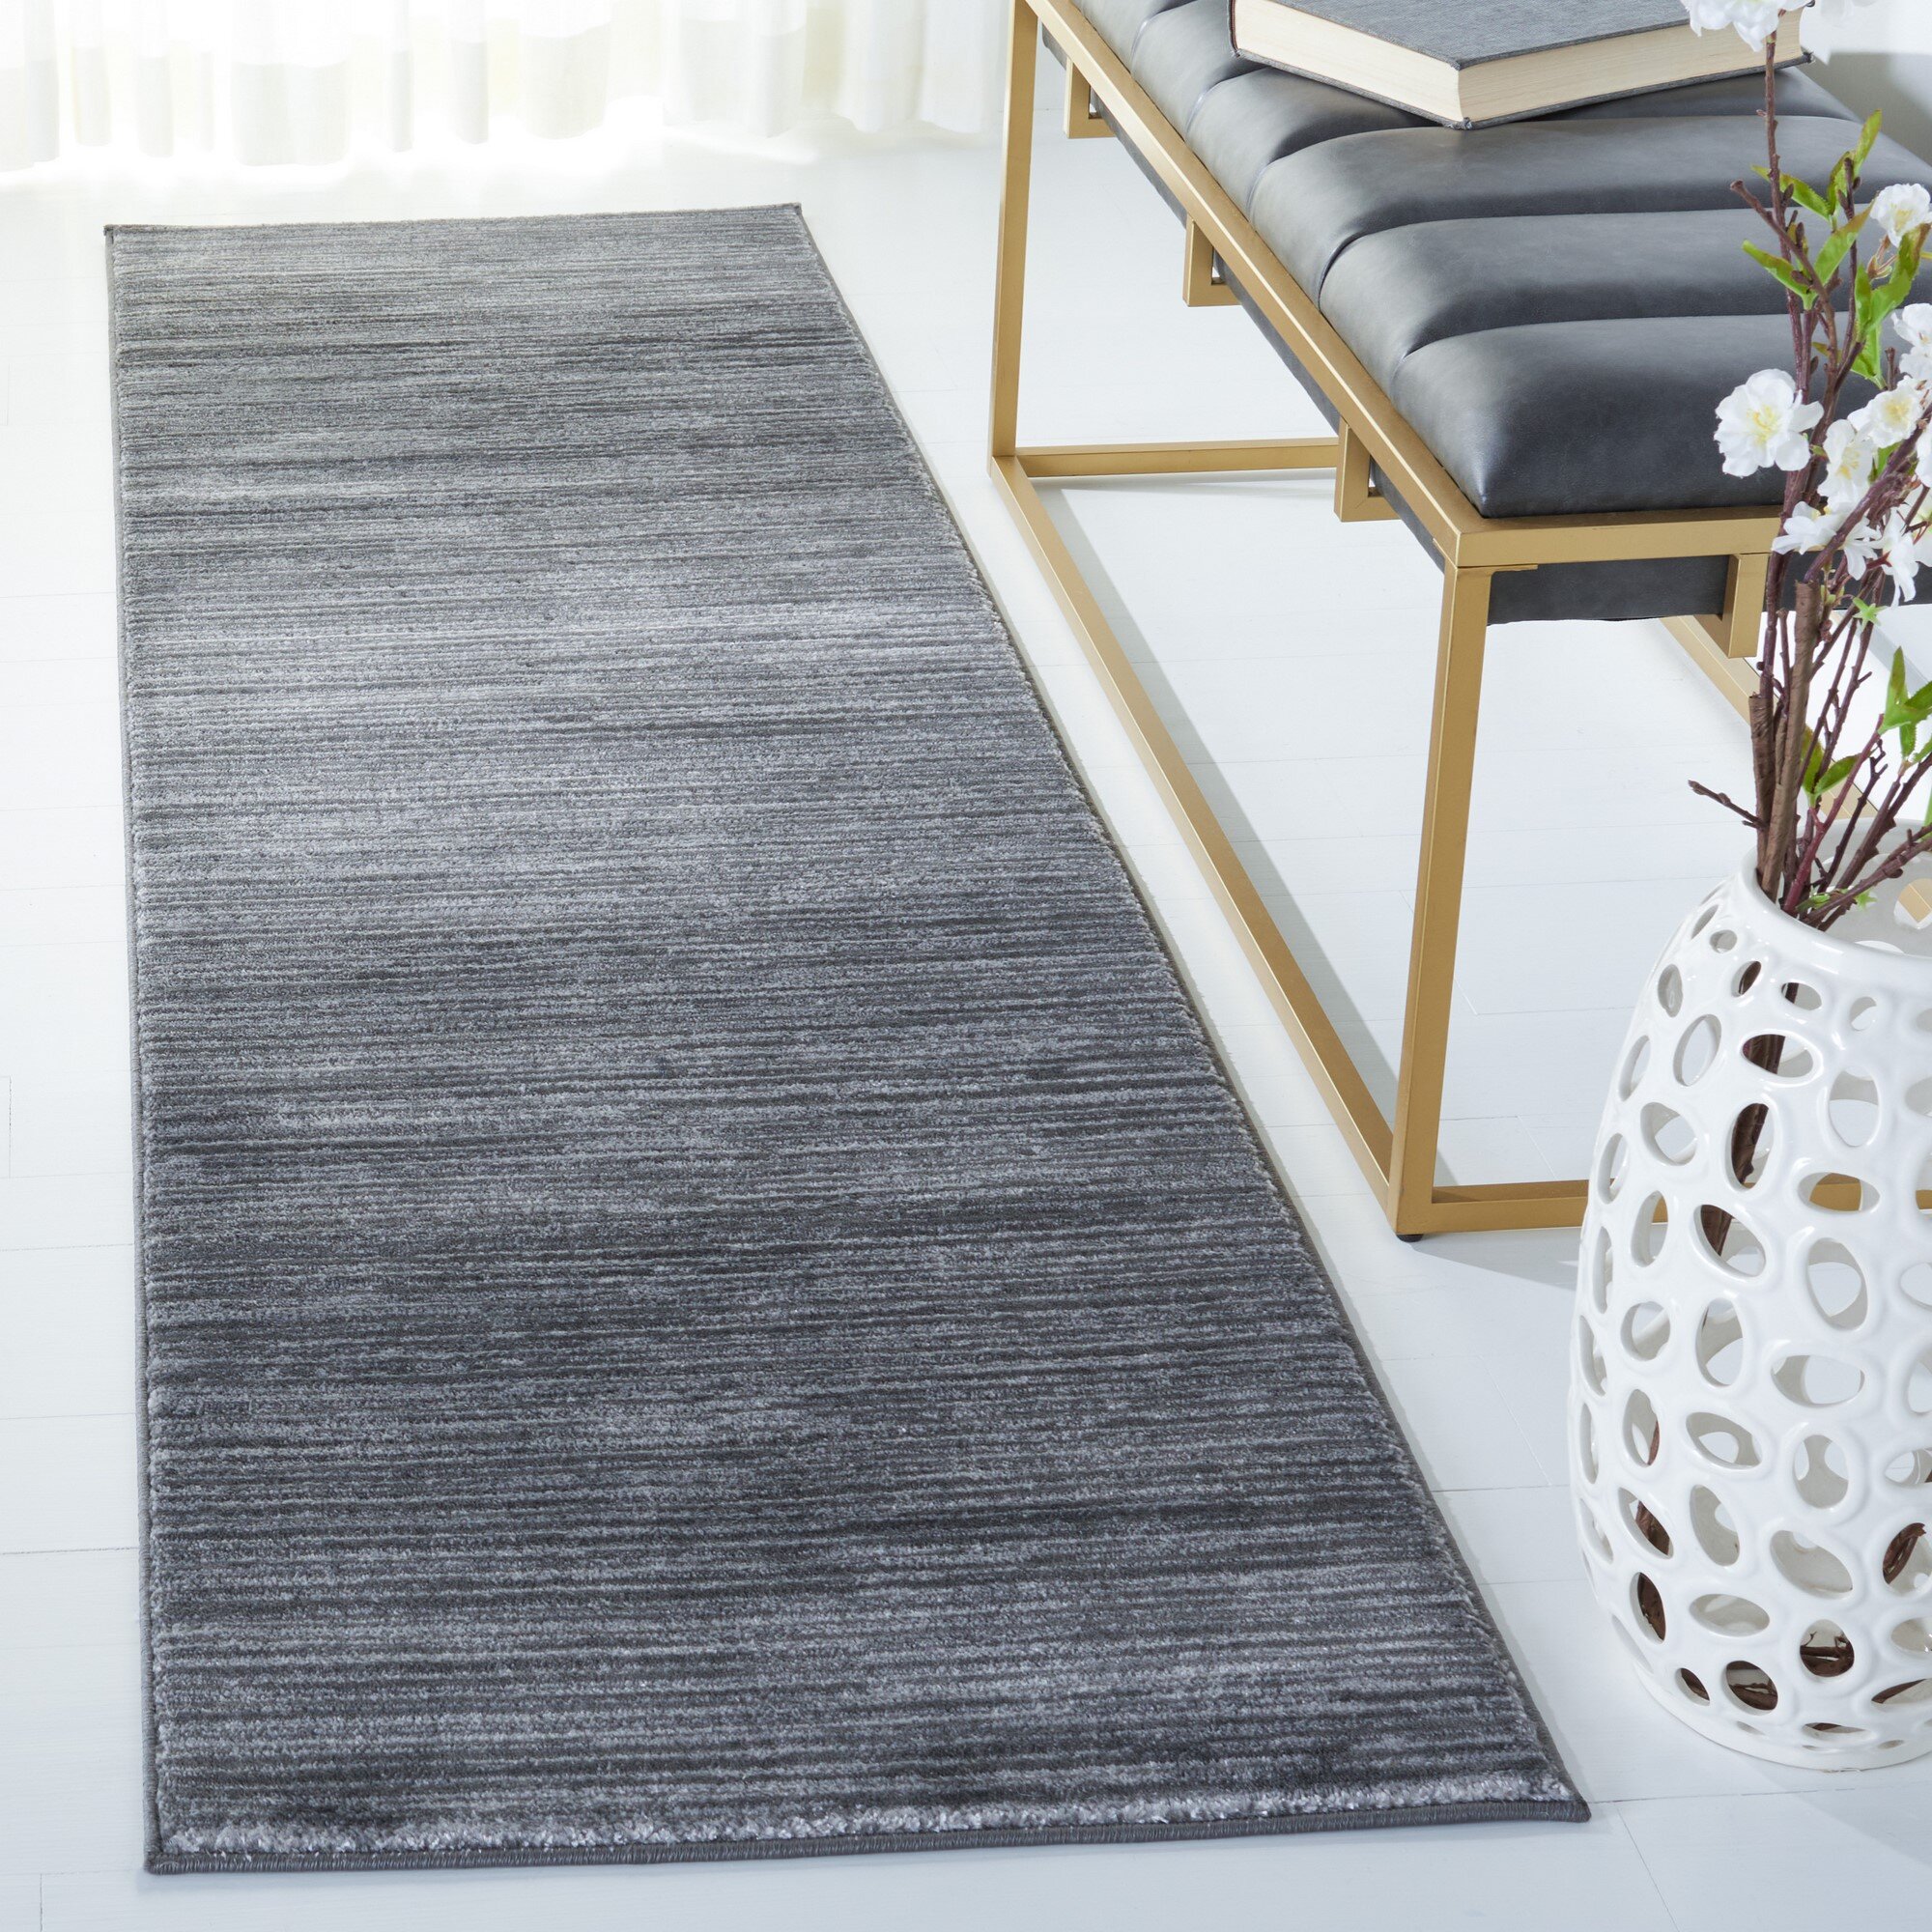 Details about   MICHIGAN BLUE GREY URBAN ABSTRACT RAW MODERN FLOOR RUG RUNNER 2 Sizes **NEW** 